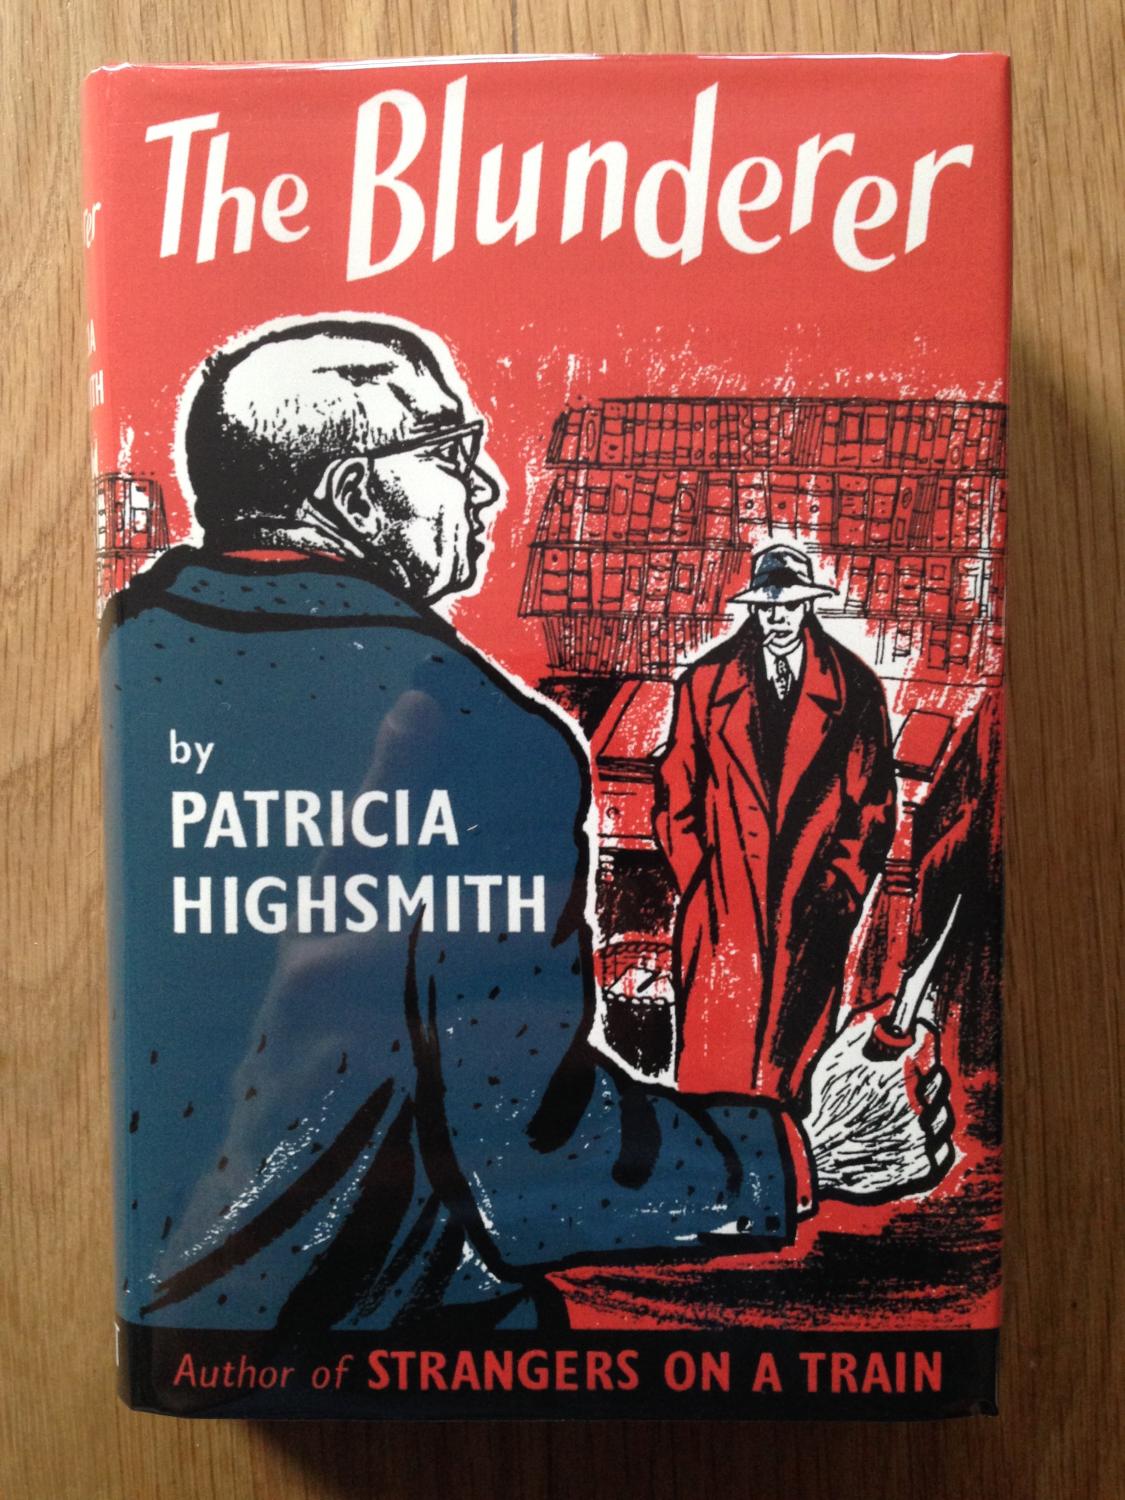 UK edition of The Blunderer